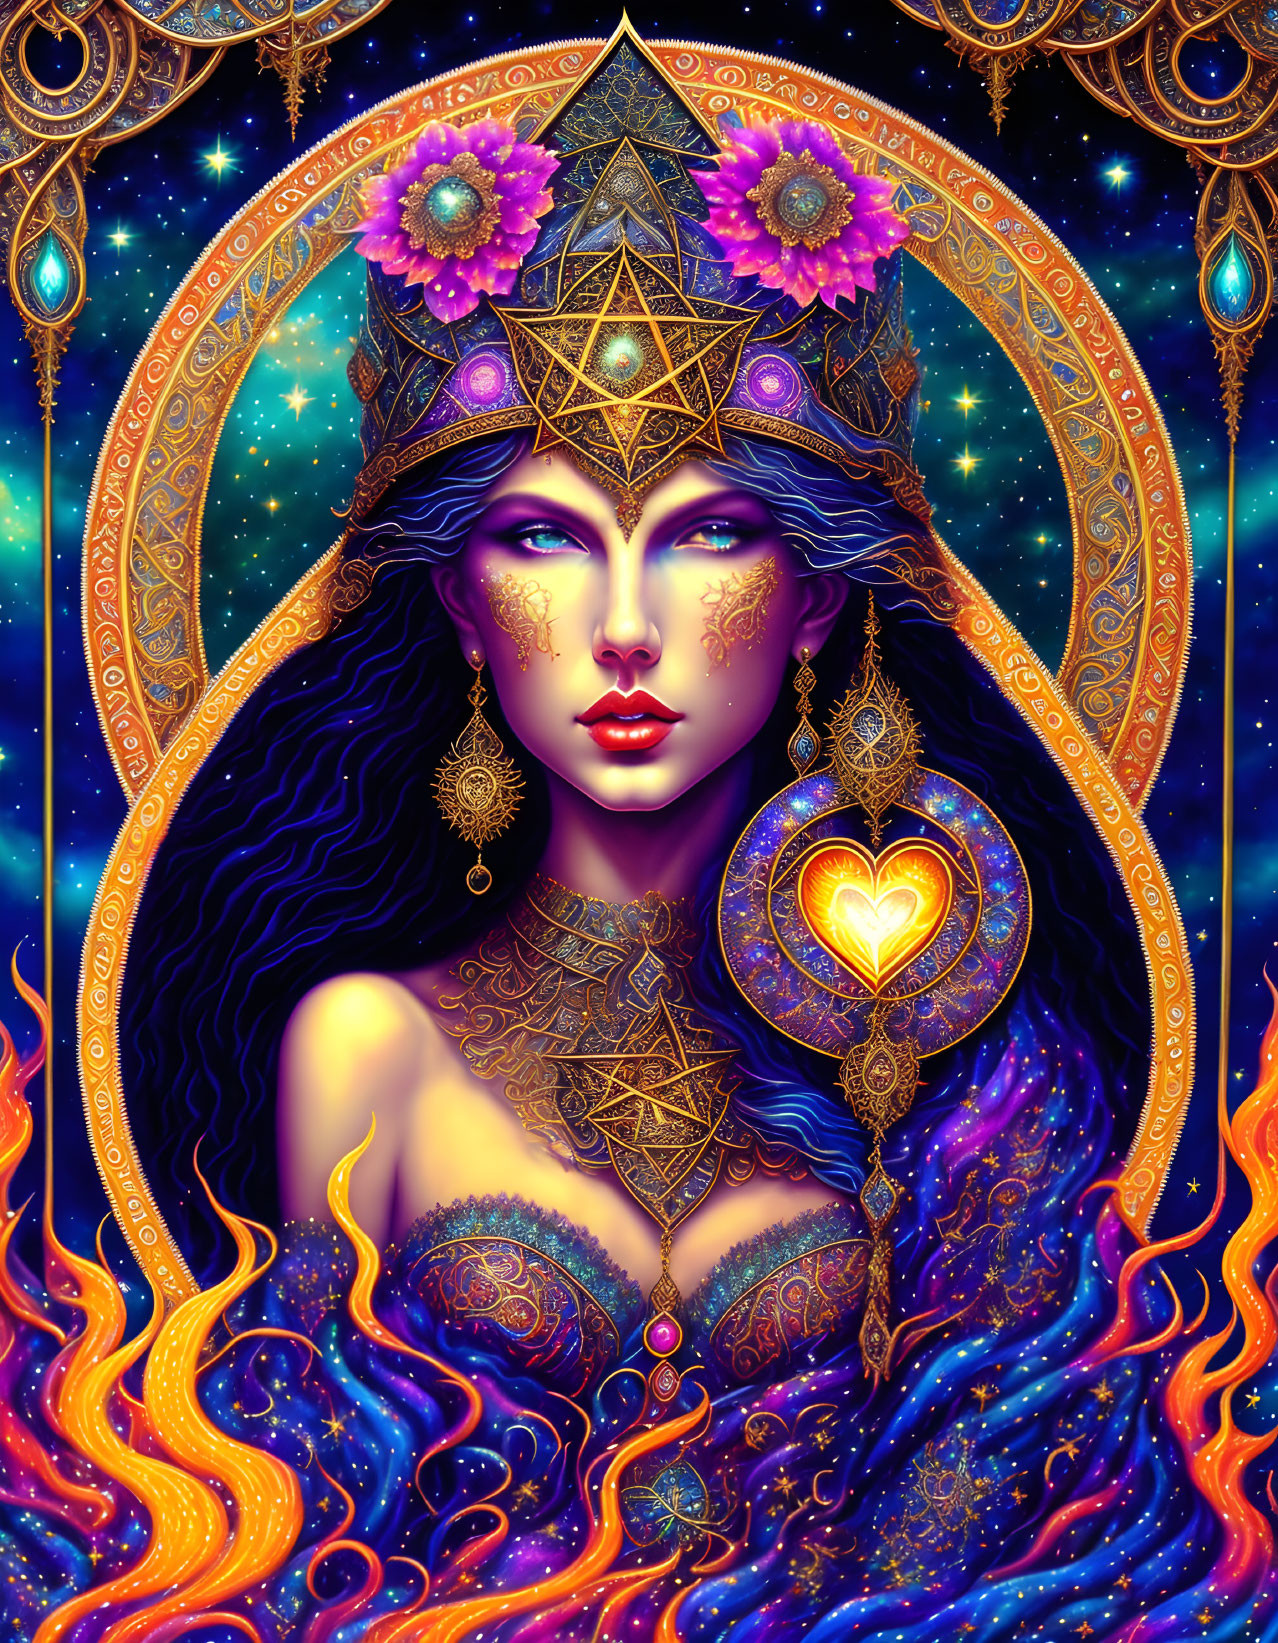 Mystical woman with celestial headdress and vibrant colors